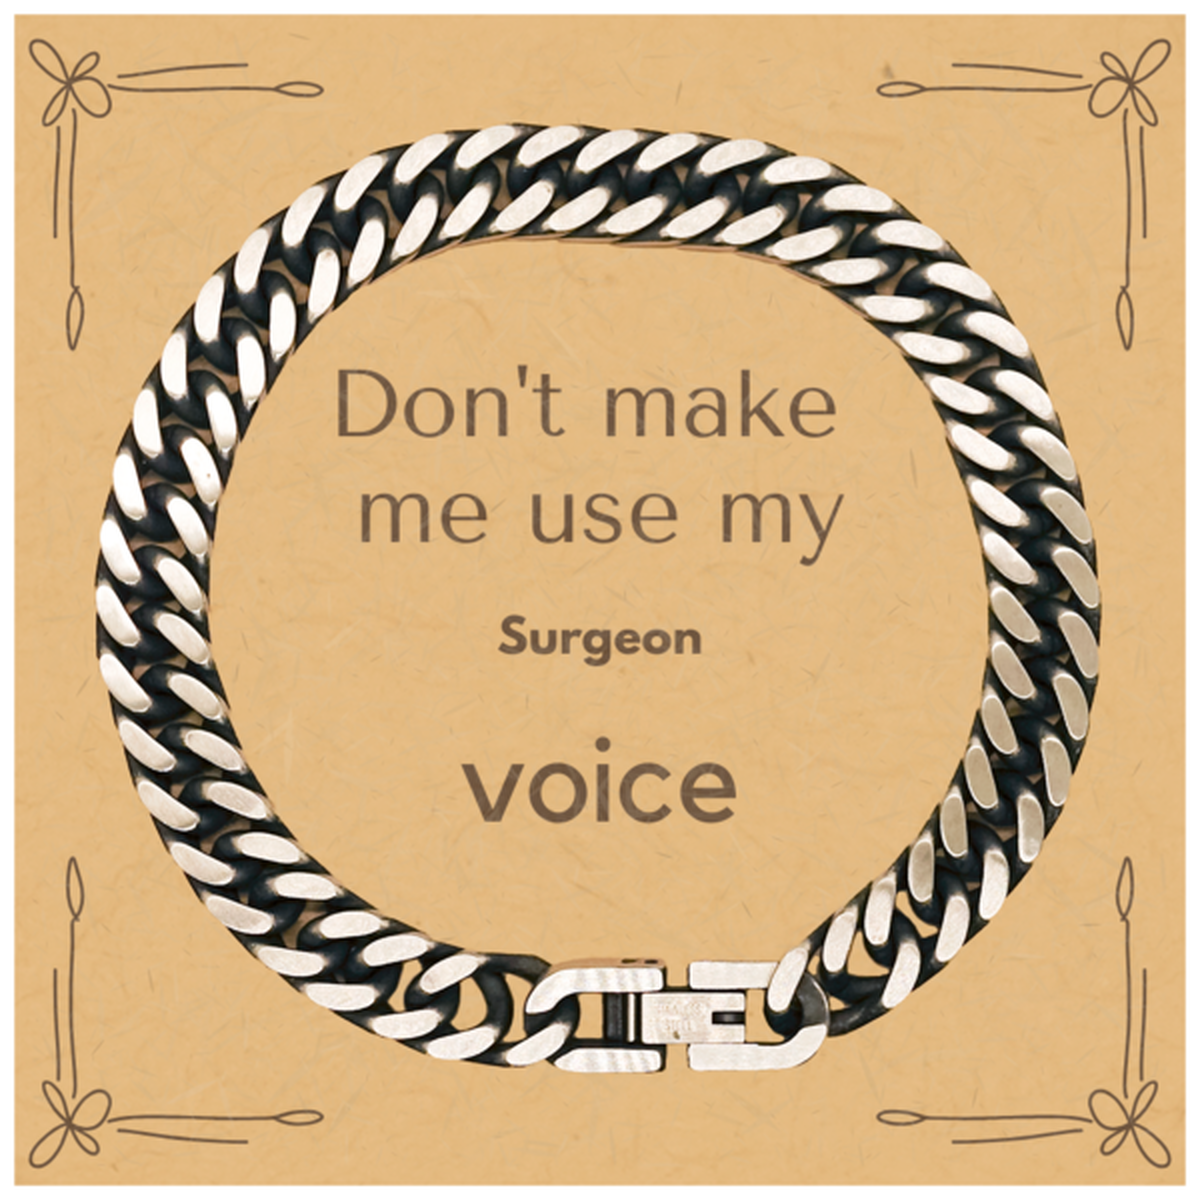 Don't make me use my Surgeon voice, Sarcasm Surgeon Card Gifts, Christmas Surgeon Cuban Link Chain Bracelet Birthday Unique Gifts For Surgeon Coworkers, Men, Women, Colleague, Friends